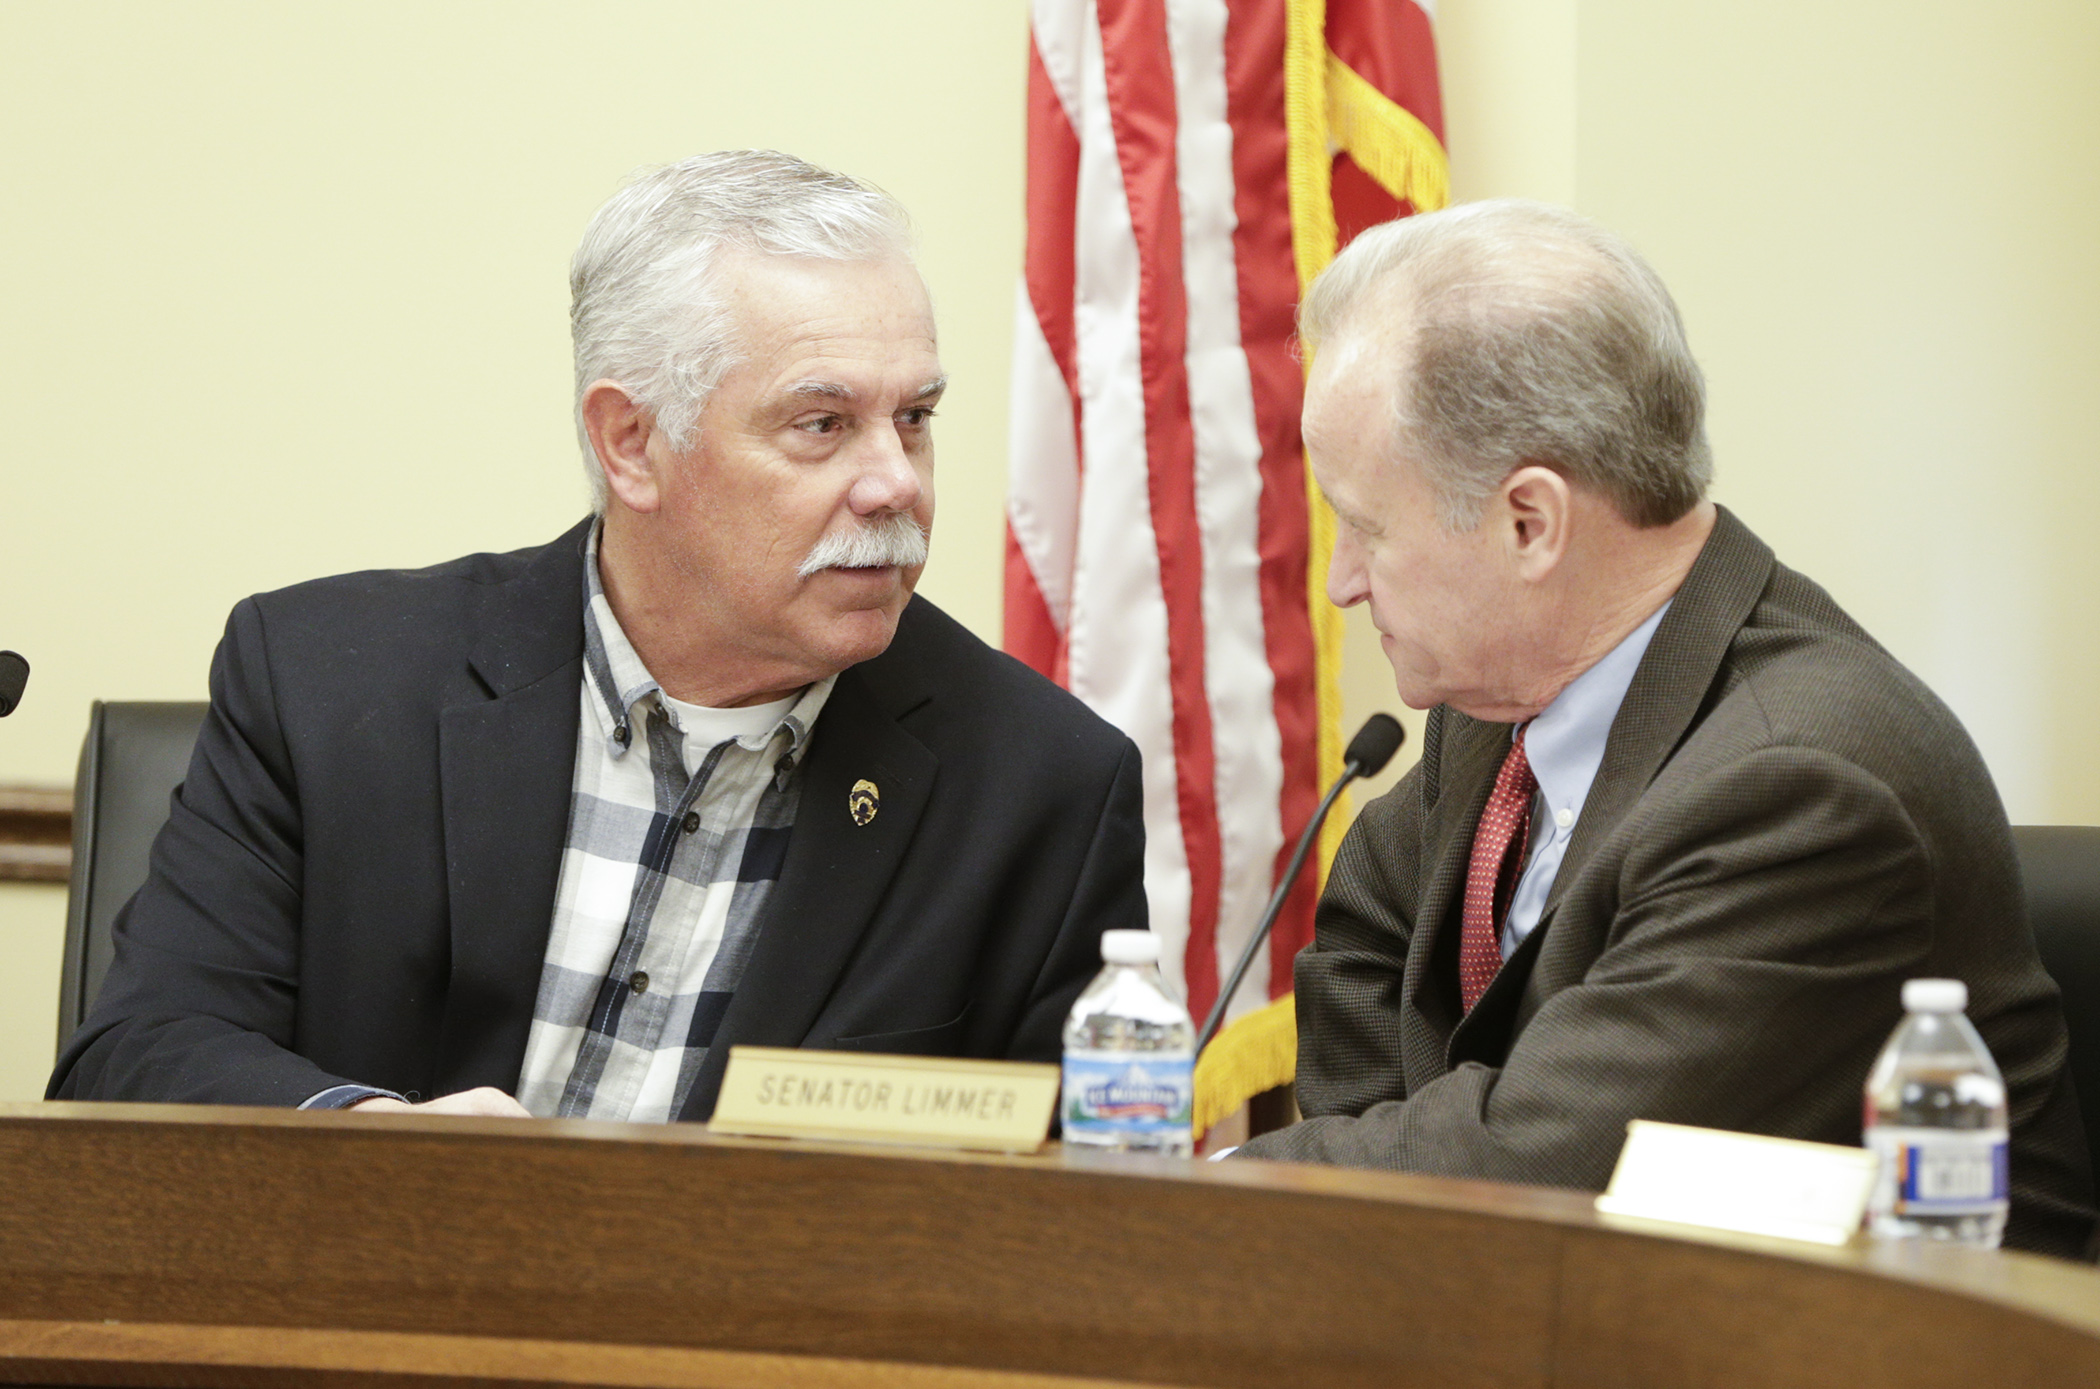 Rep. Tony Cornish and Sen. Warren Limmer, co-chairs of the omnibus public safety conference committee, confer before the start of the May 2 meeting. House Photography file photo